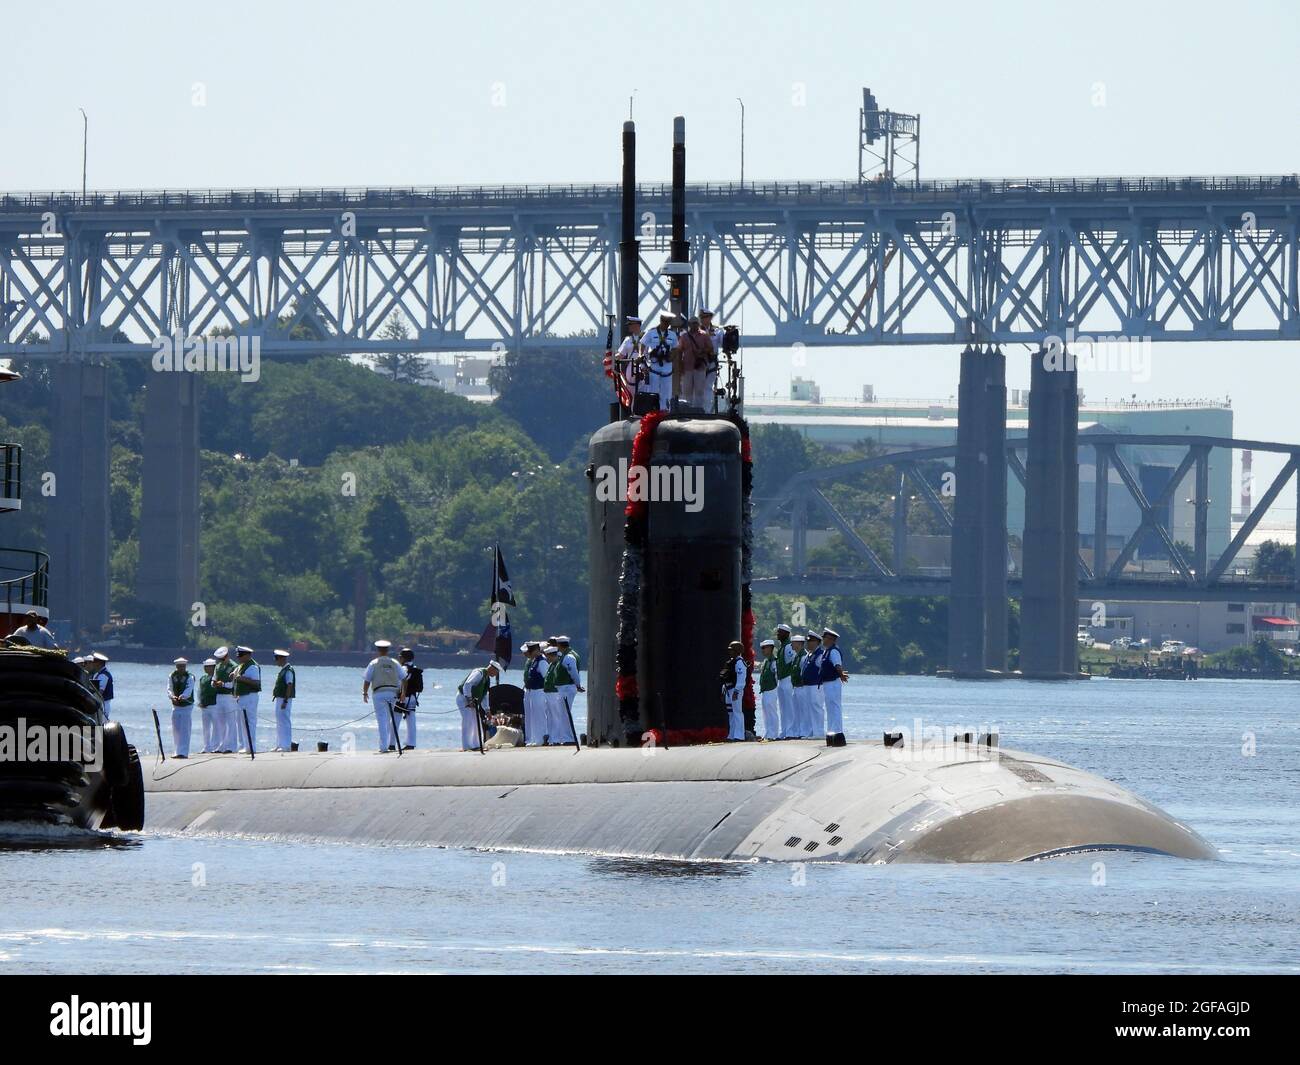 New London, United States. 24th Aug, 2021. The U.S. Navy nuclear-power Los Angeles-class fast attack submarine USS San Juan makes way up the Thames River as it returns to Submarine Base New London August 24, 2021 in New London, Connecticut. The ship is returning to homeport after a seven-month deployment. Credit: Planetpix/Alamy Live News Stock Photo